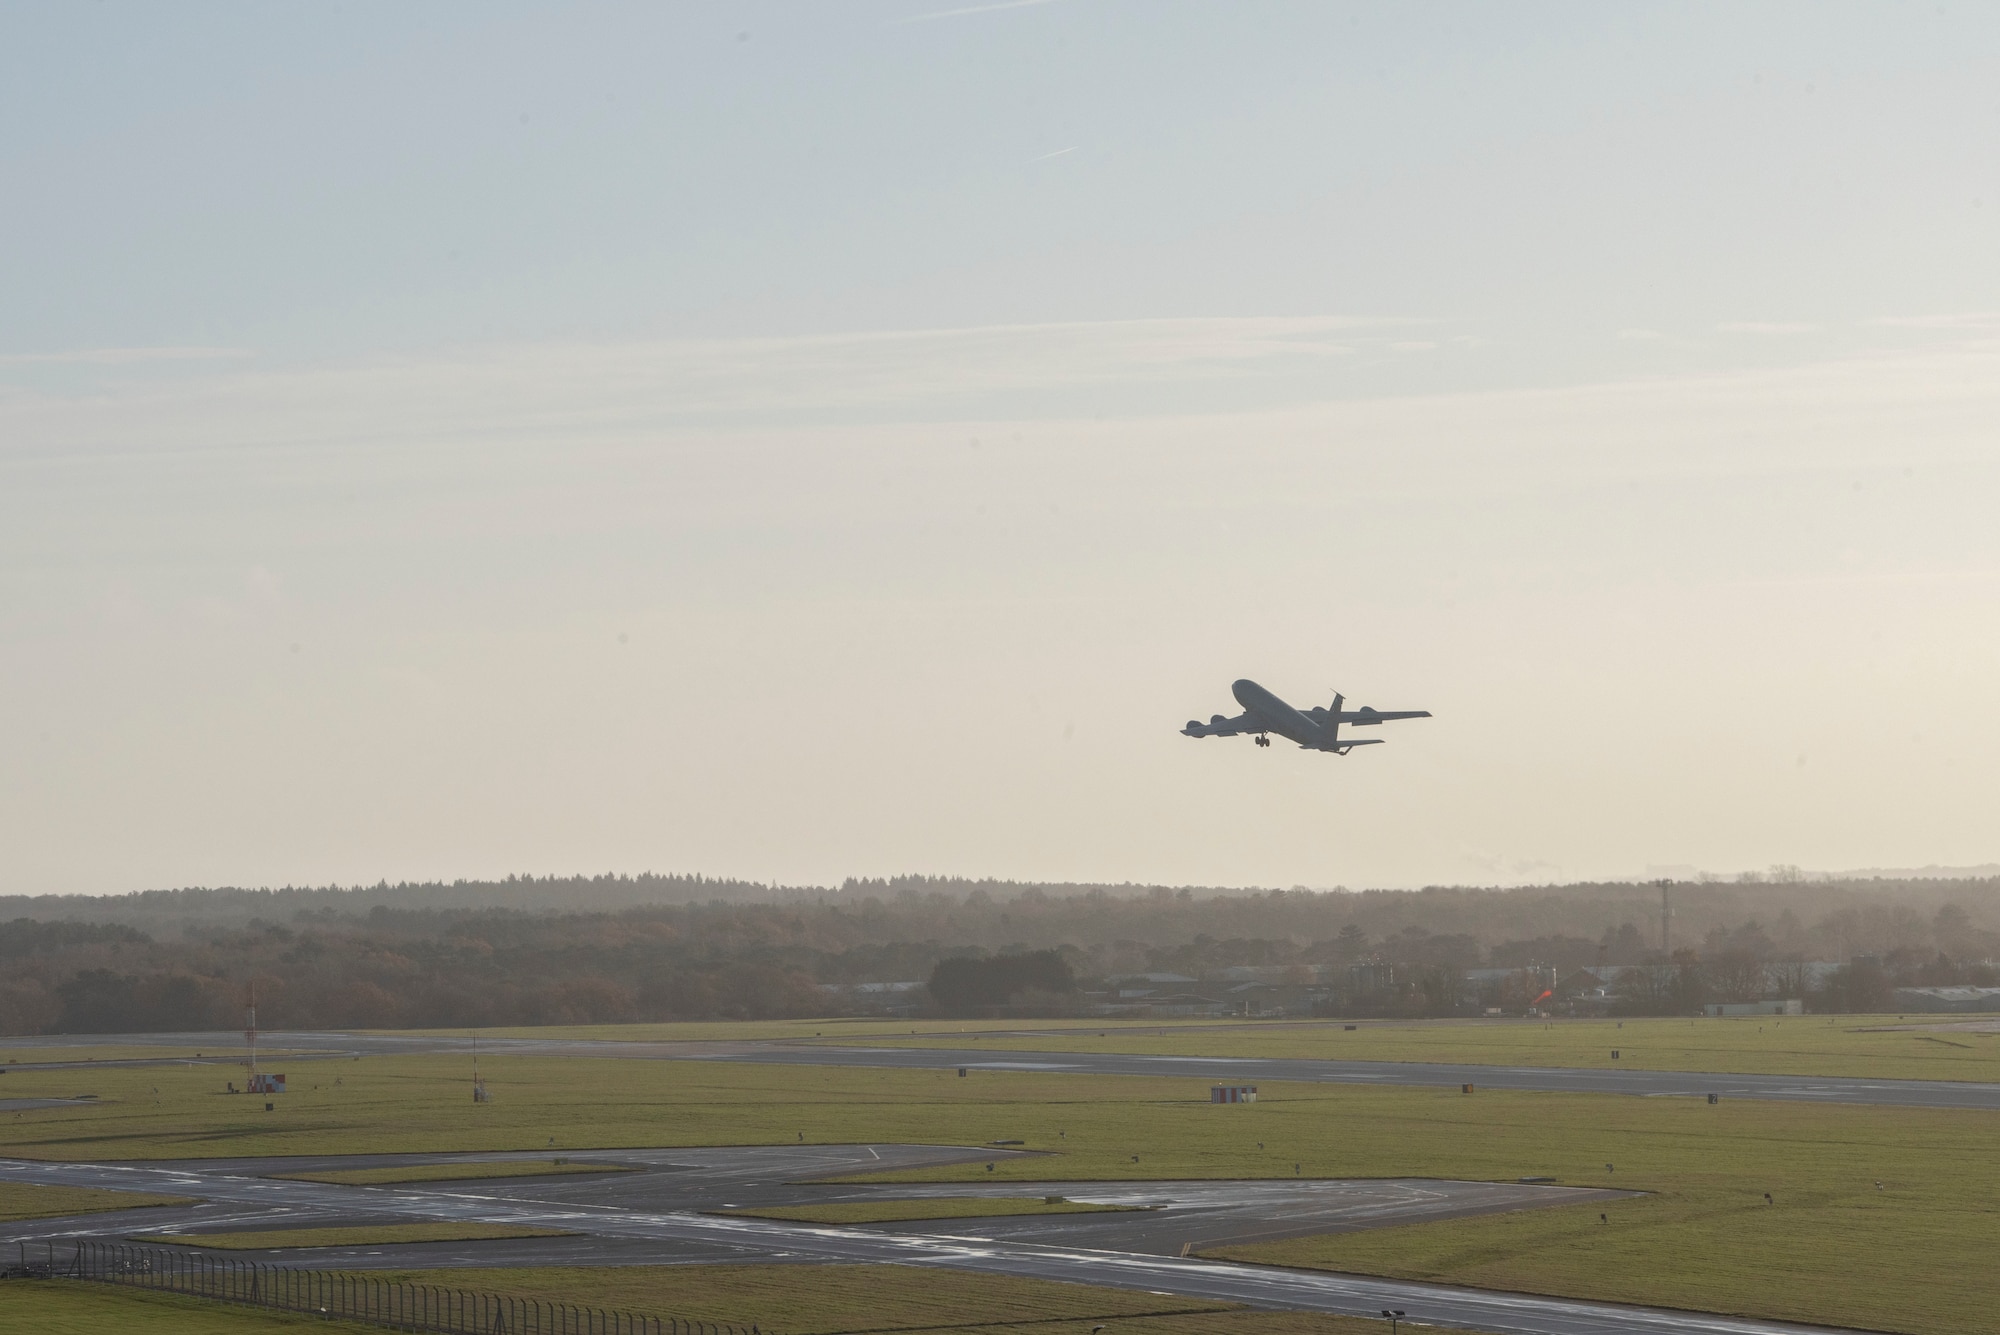 A U.S. Air Force KC-135 Stratotanker aircraft assigned to the 100th Air Refueling Wing departs Royal Air Force Mildenhall, England, Dec. 14, 2020. The KC-135 supports the delivery of fuel to aircraft in flight and extends the range of U.S. Air Force, allied and partner nation aircraft. (U.S. Air Force photo by Airman 1st Class Joseph Barron)